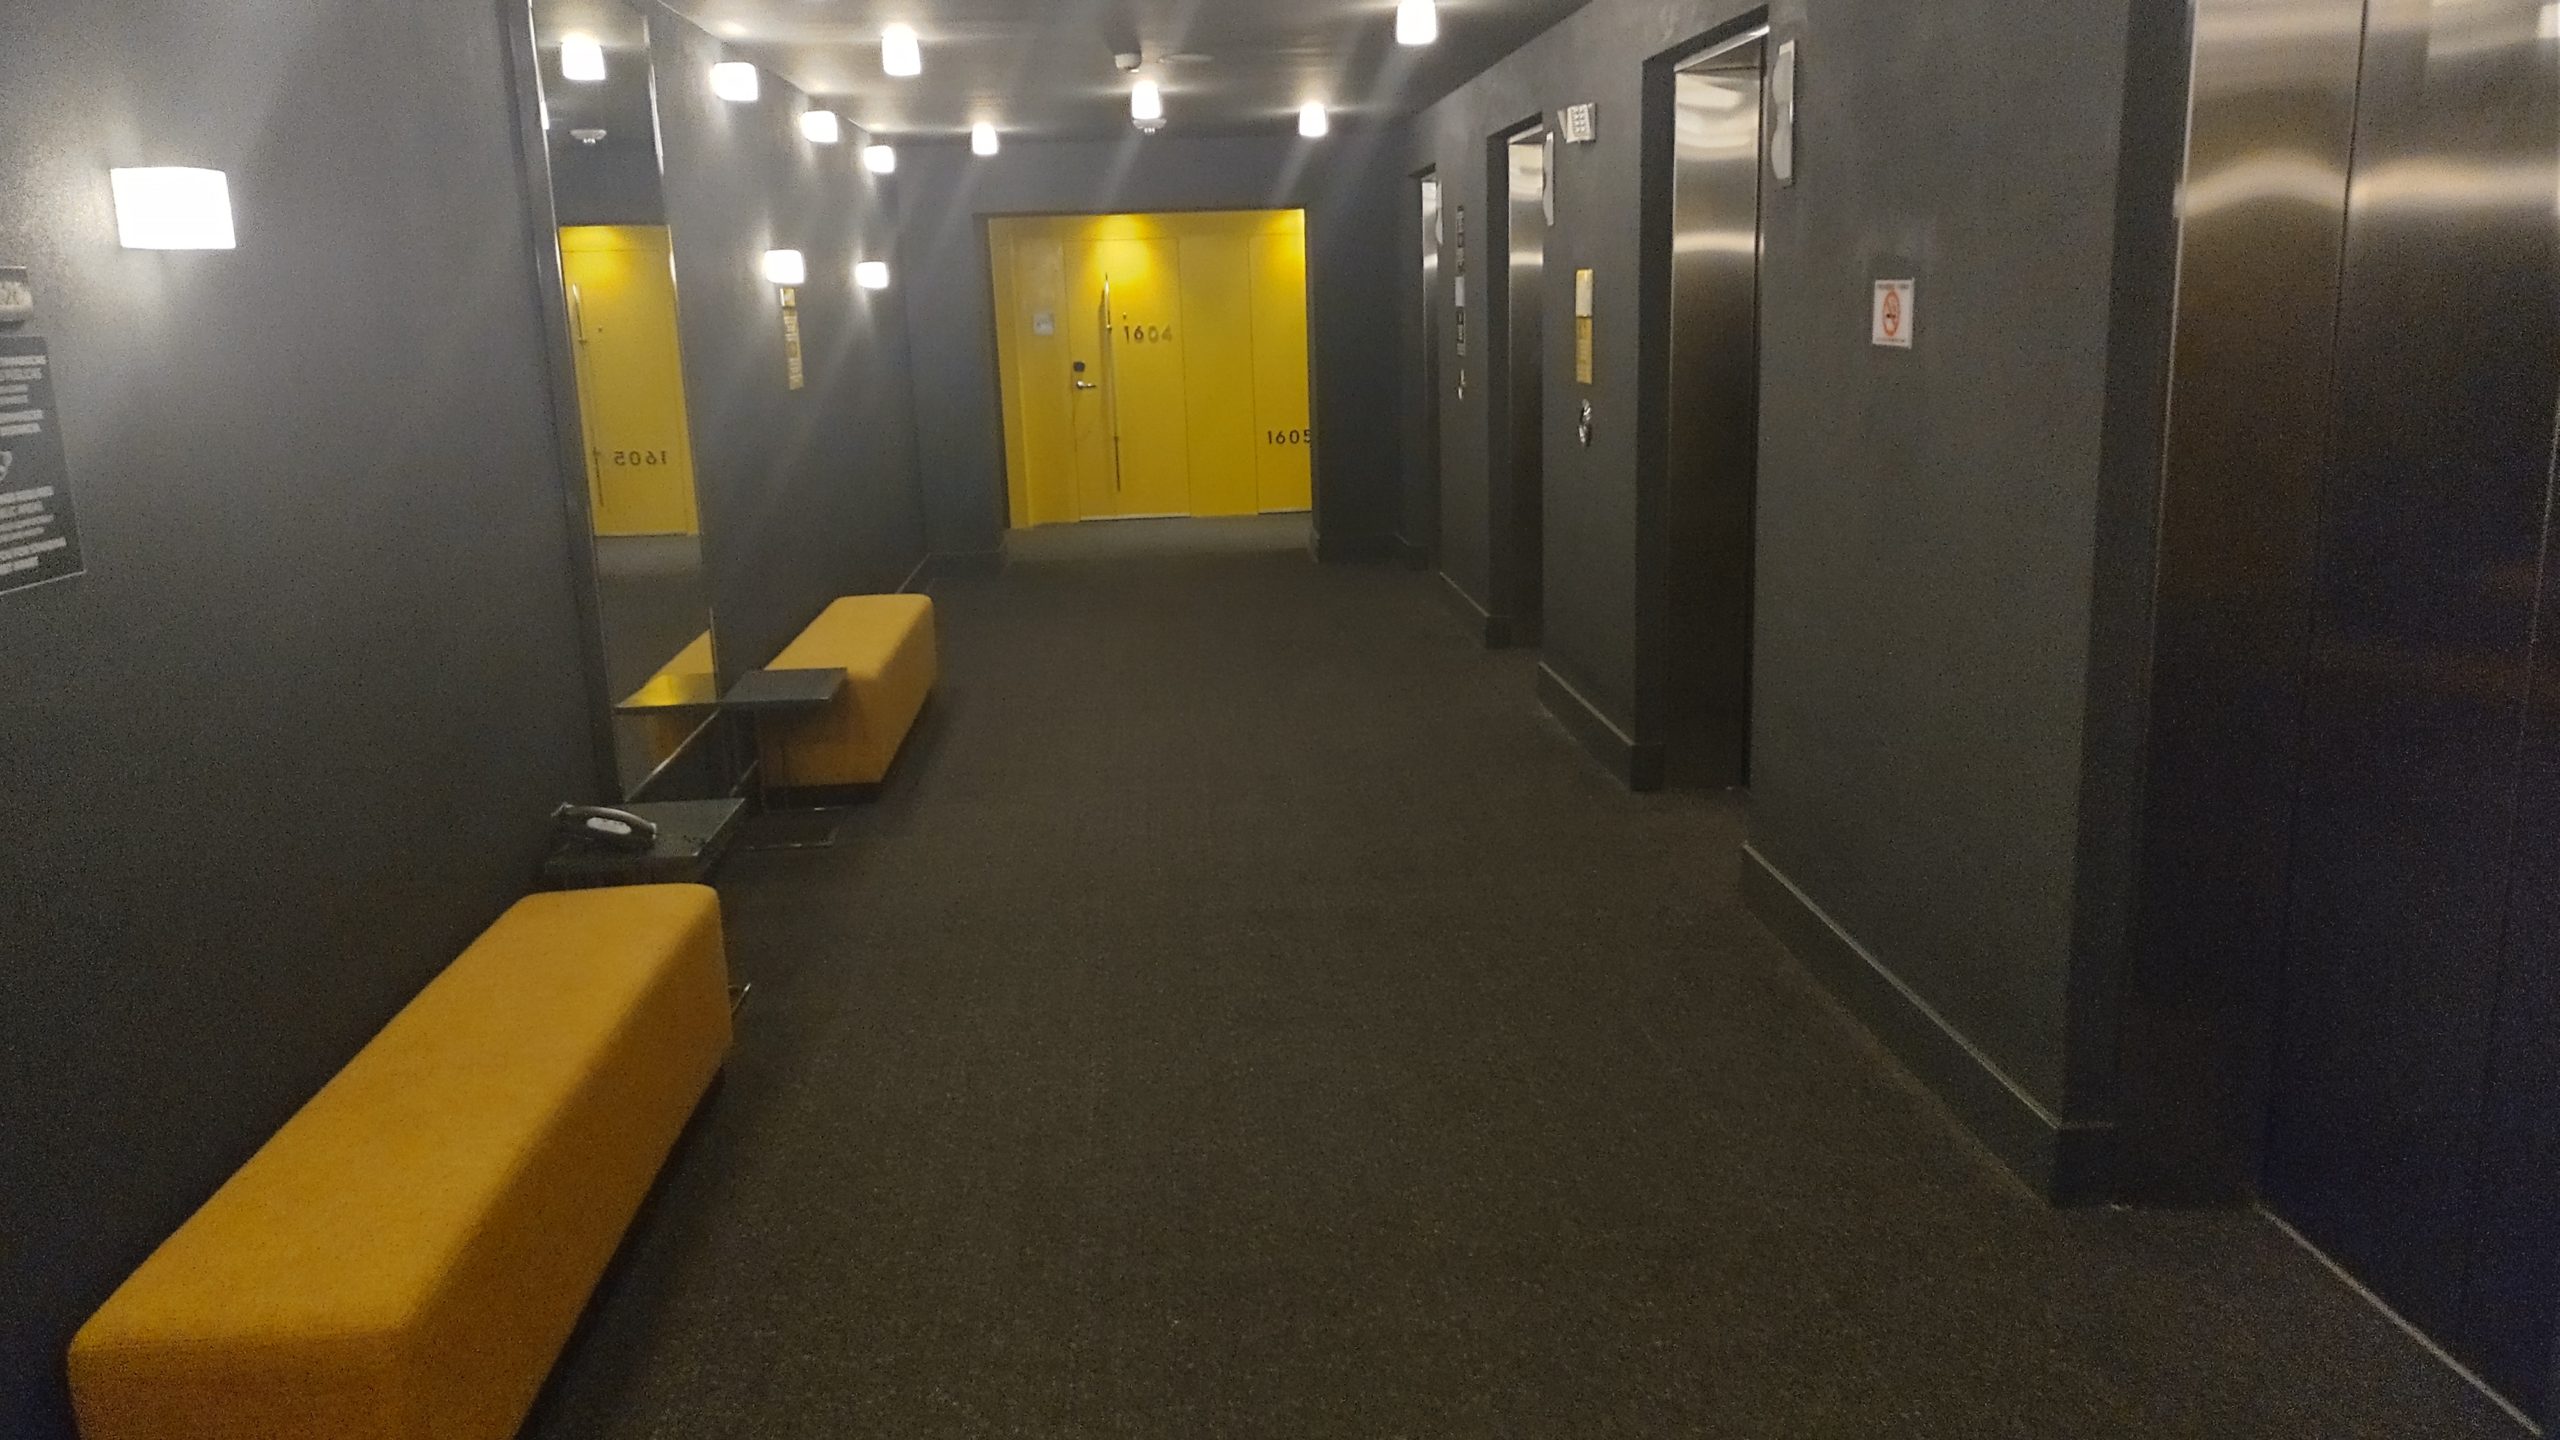 picture of the elevators by the rooms on floor 16.